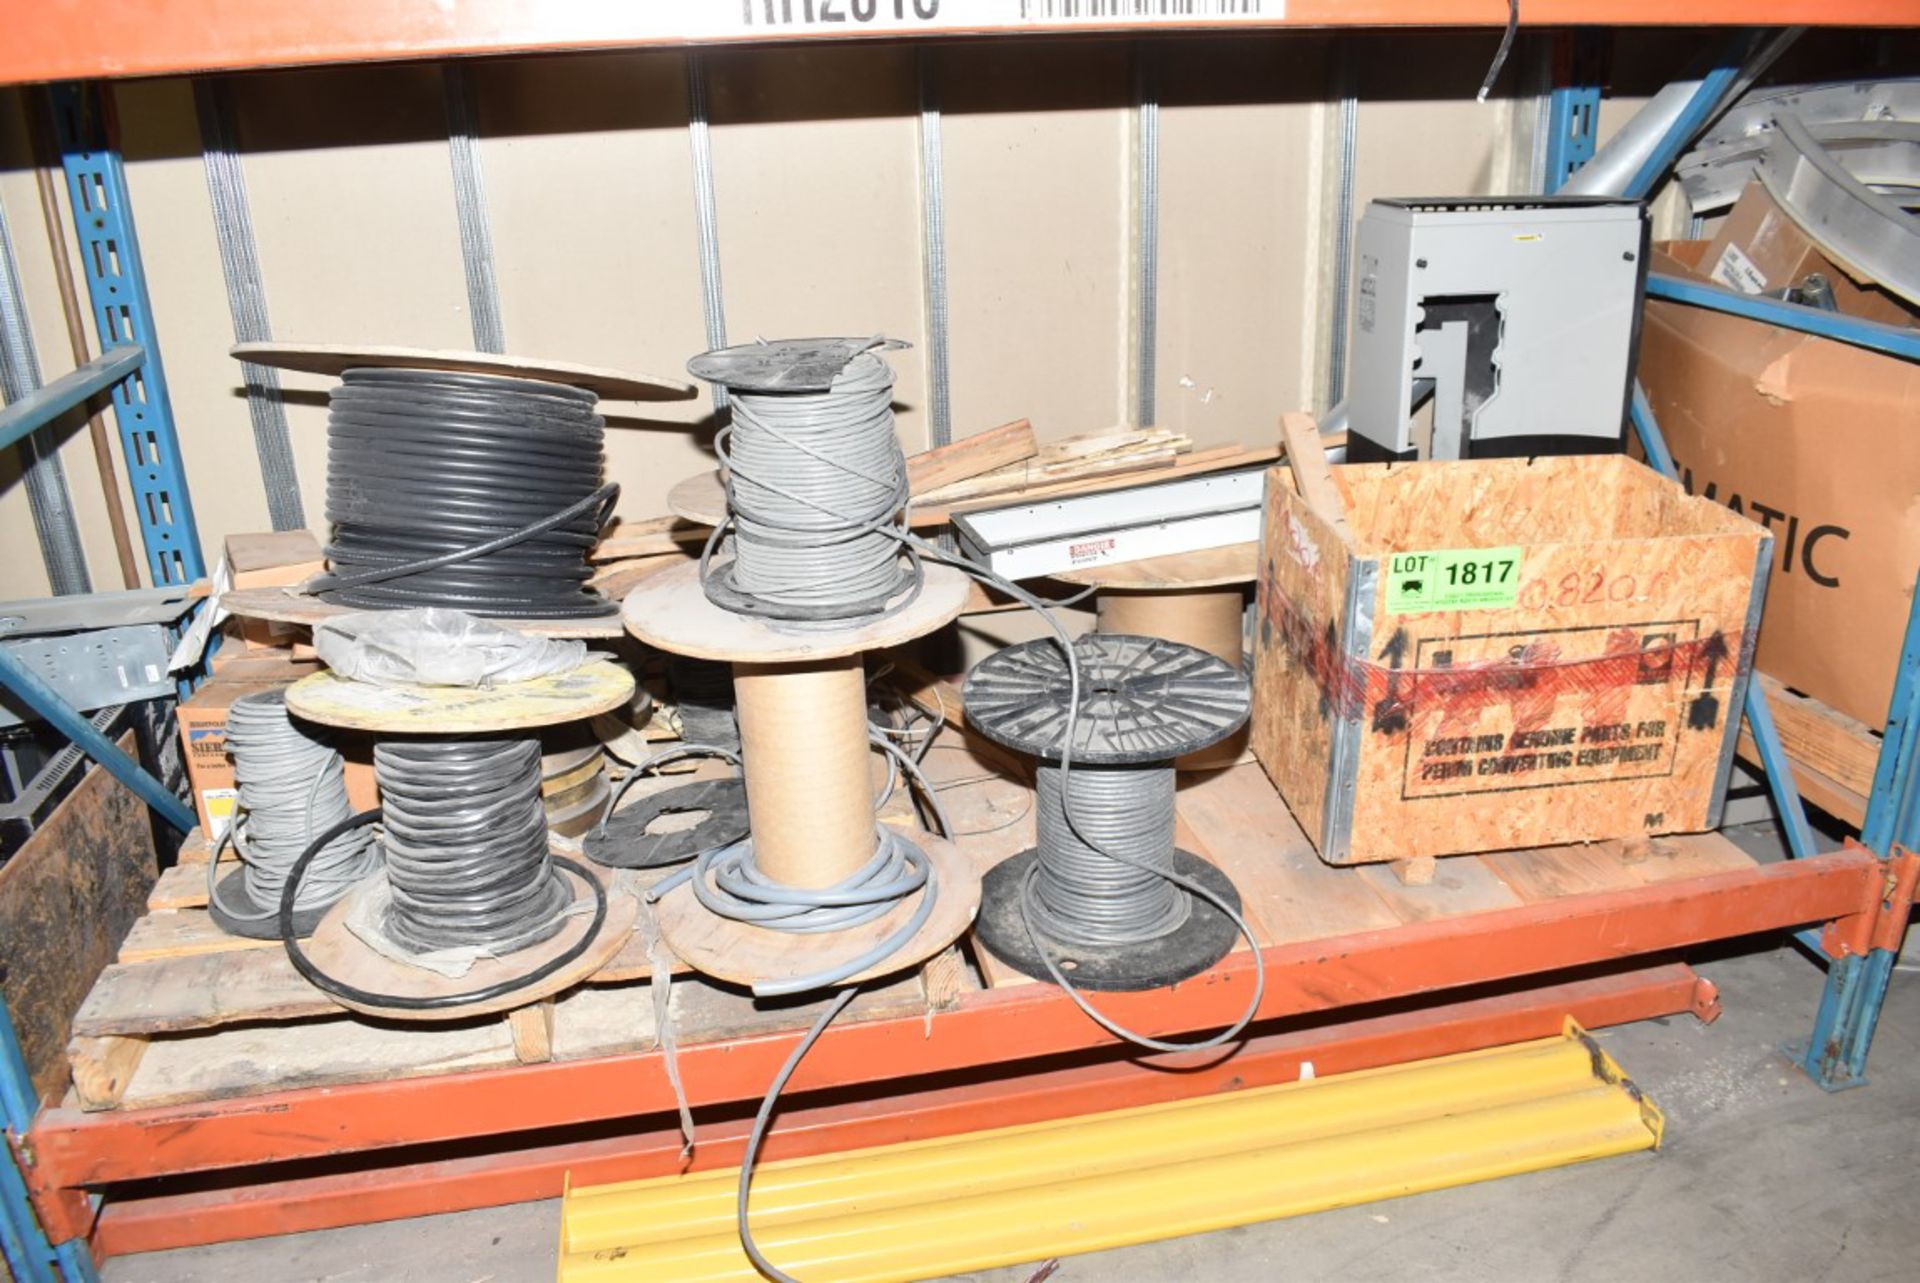 LOT/ CONTENTS OF SHELF - INCLUDING ELECTRICAL WIRE/CABLE, SPARE MOTOR, SPARE PARTS [RIGGING FEE